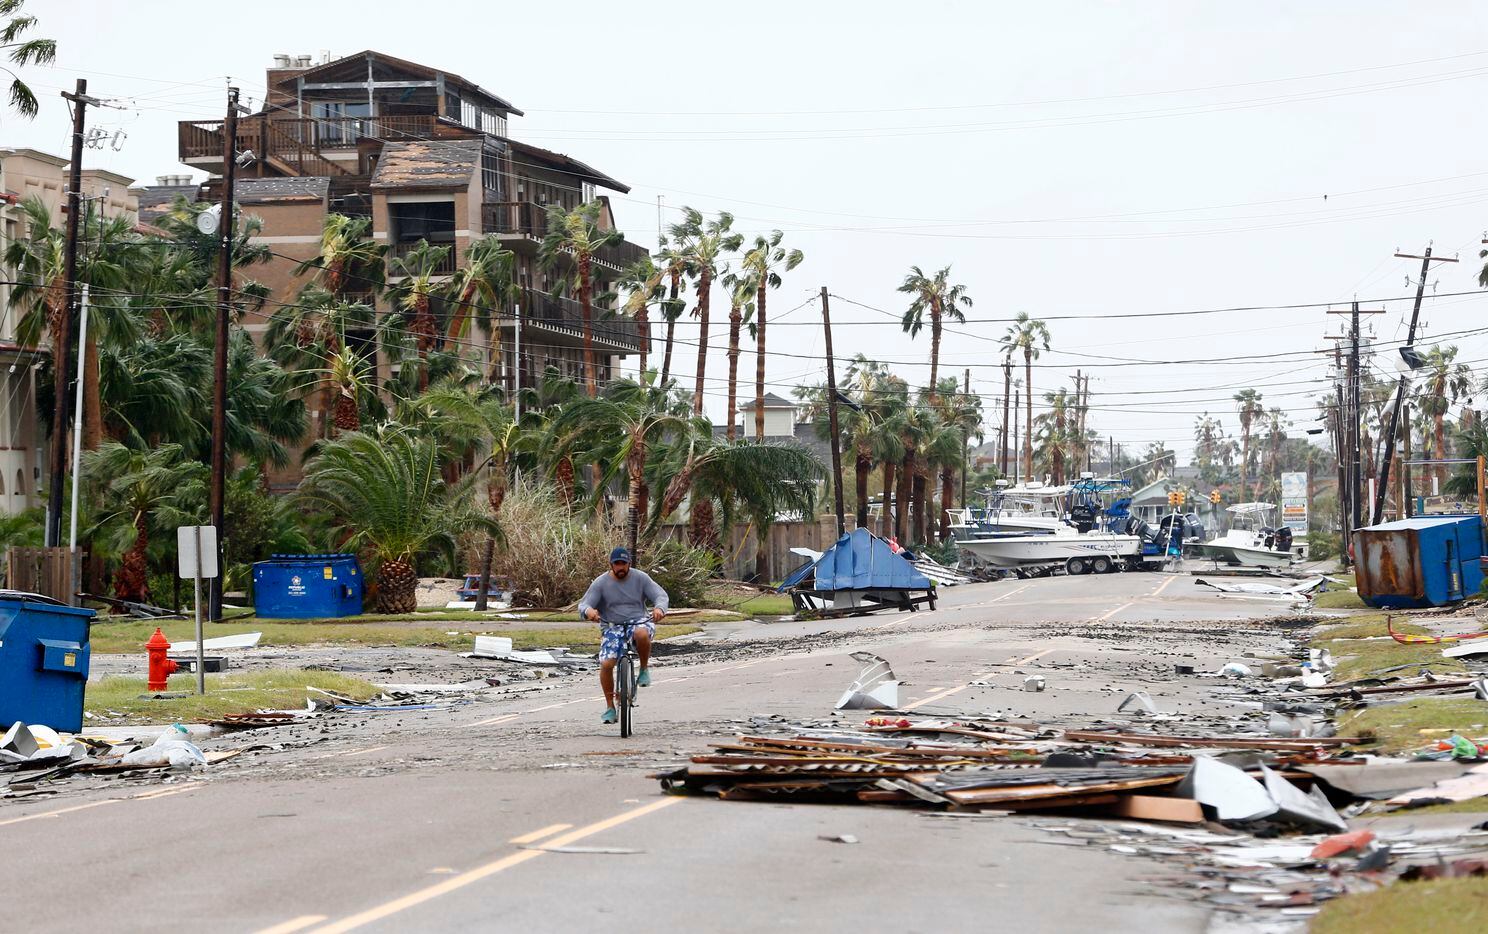 Mike Andrews rides his bike down the street after Hurricane Harvey hit Port Aransas, Texas on Aug. 26, 2017.